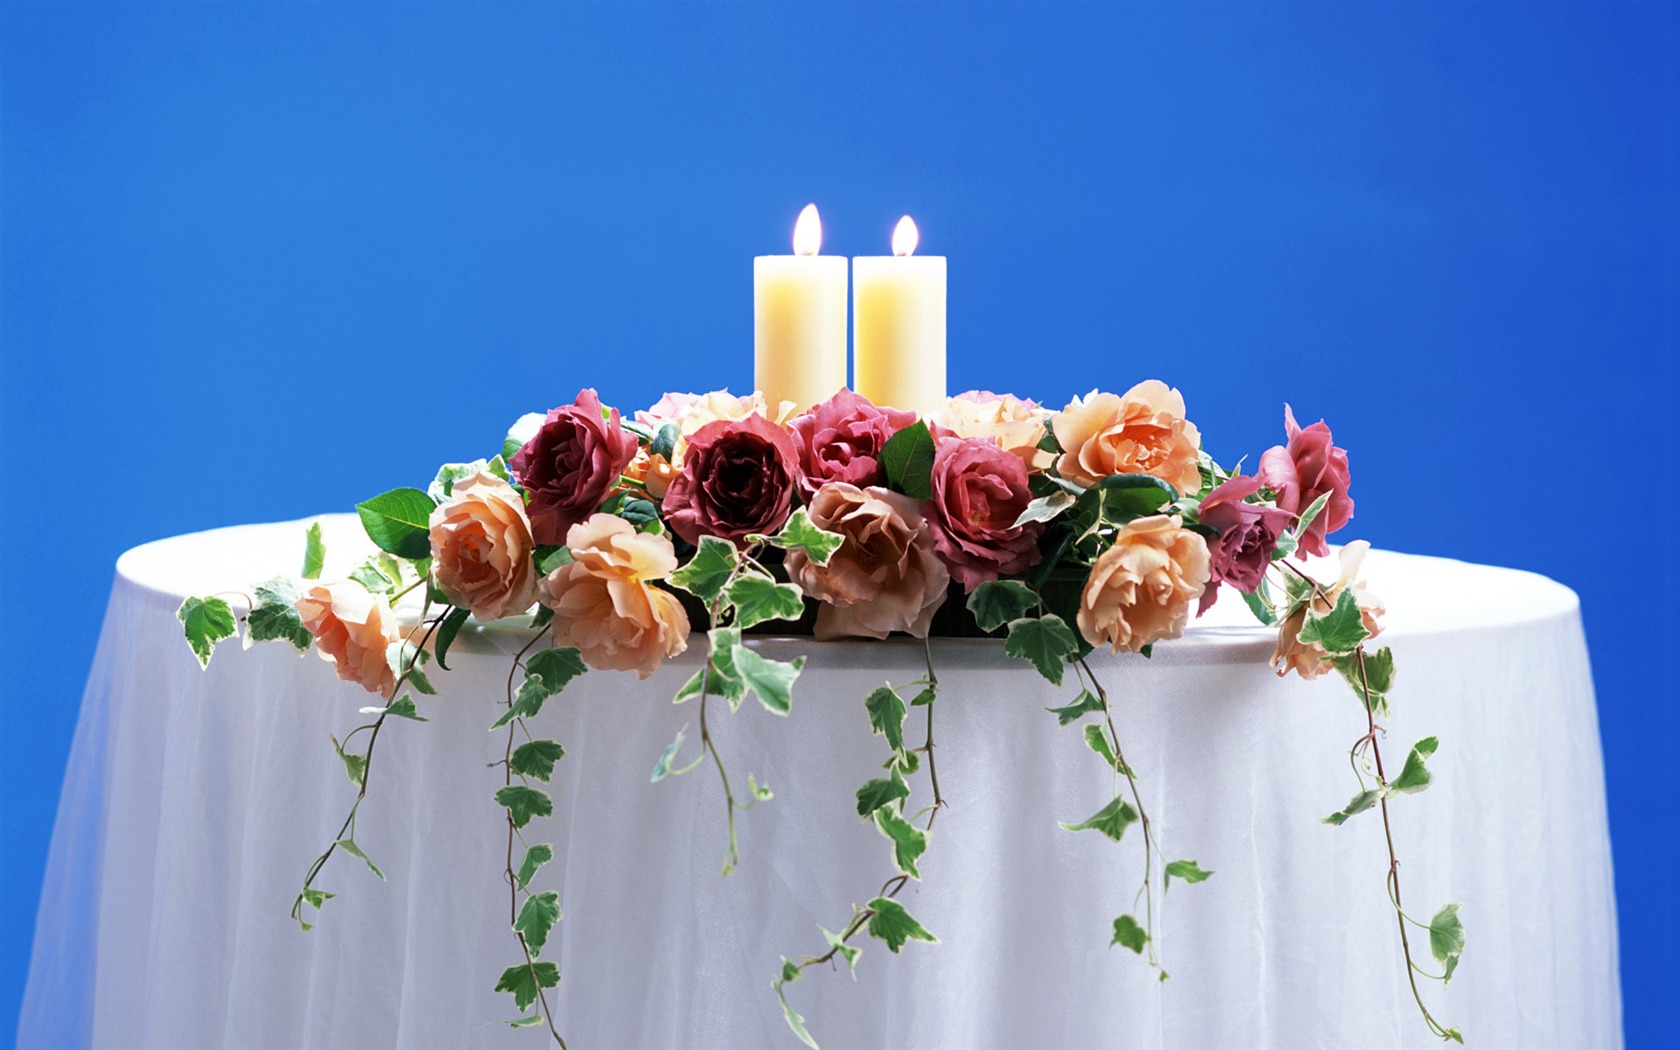 Weddings and Flowers wallpaper (2) #13 - 1680x1050